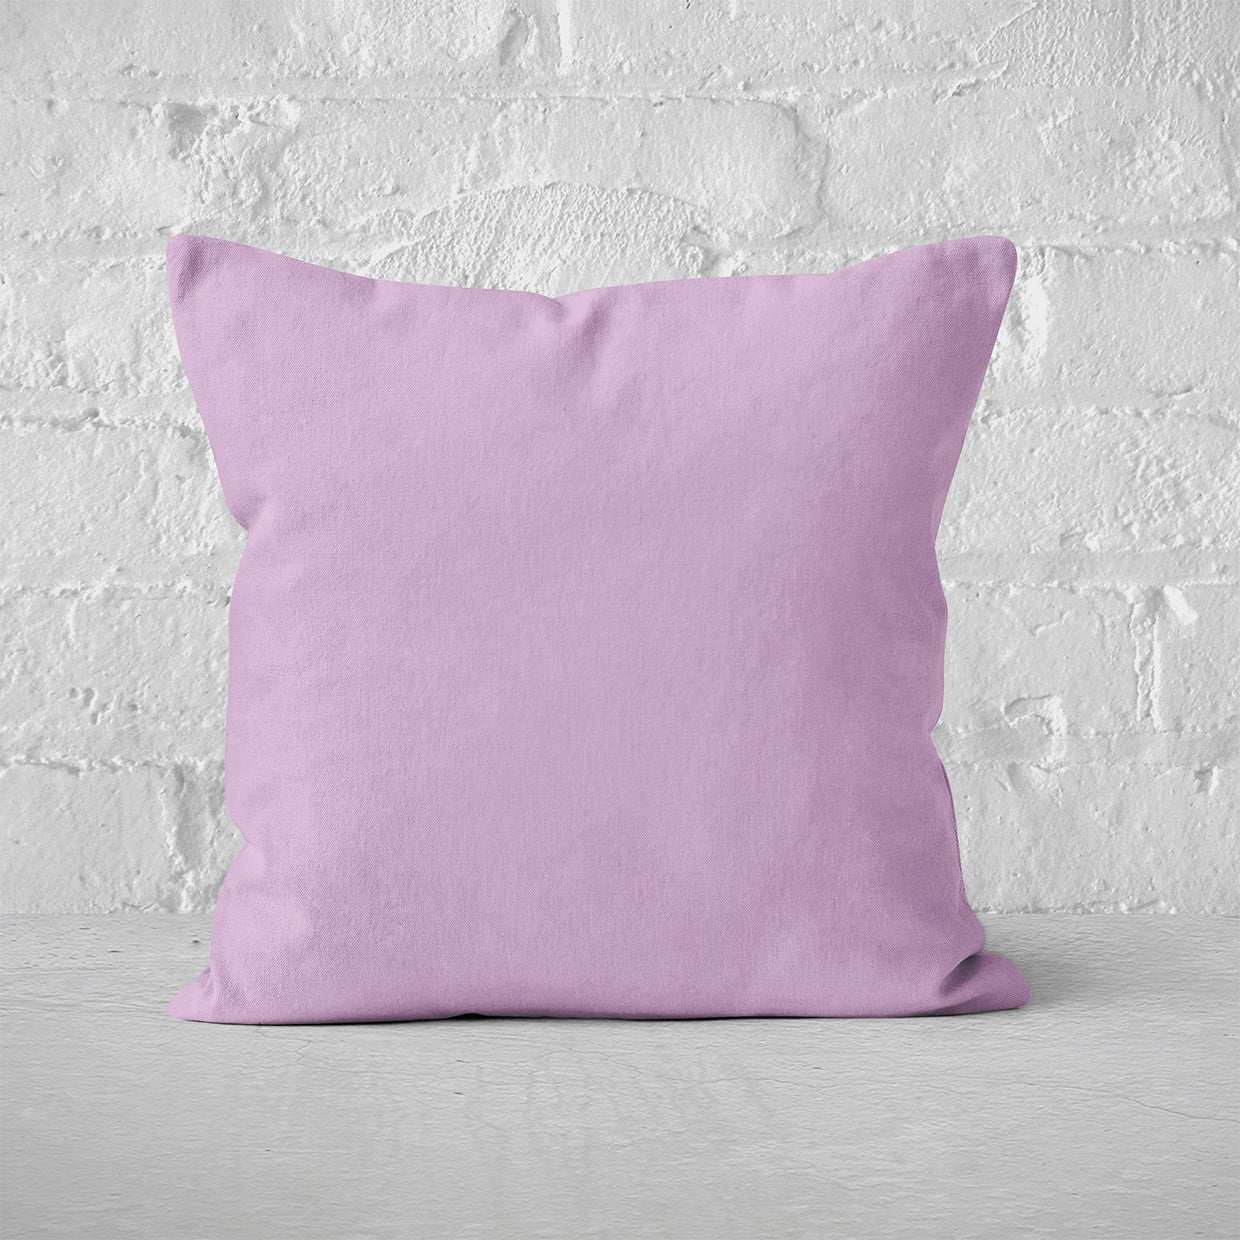 Pillow Cover Art Feature 'Solid' - Lavender - Cotton Twill